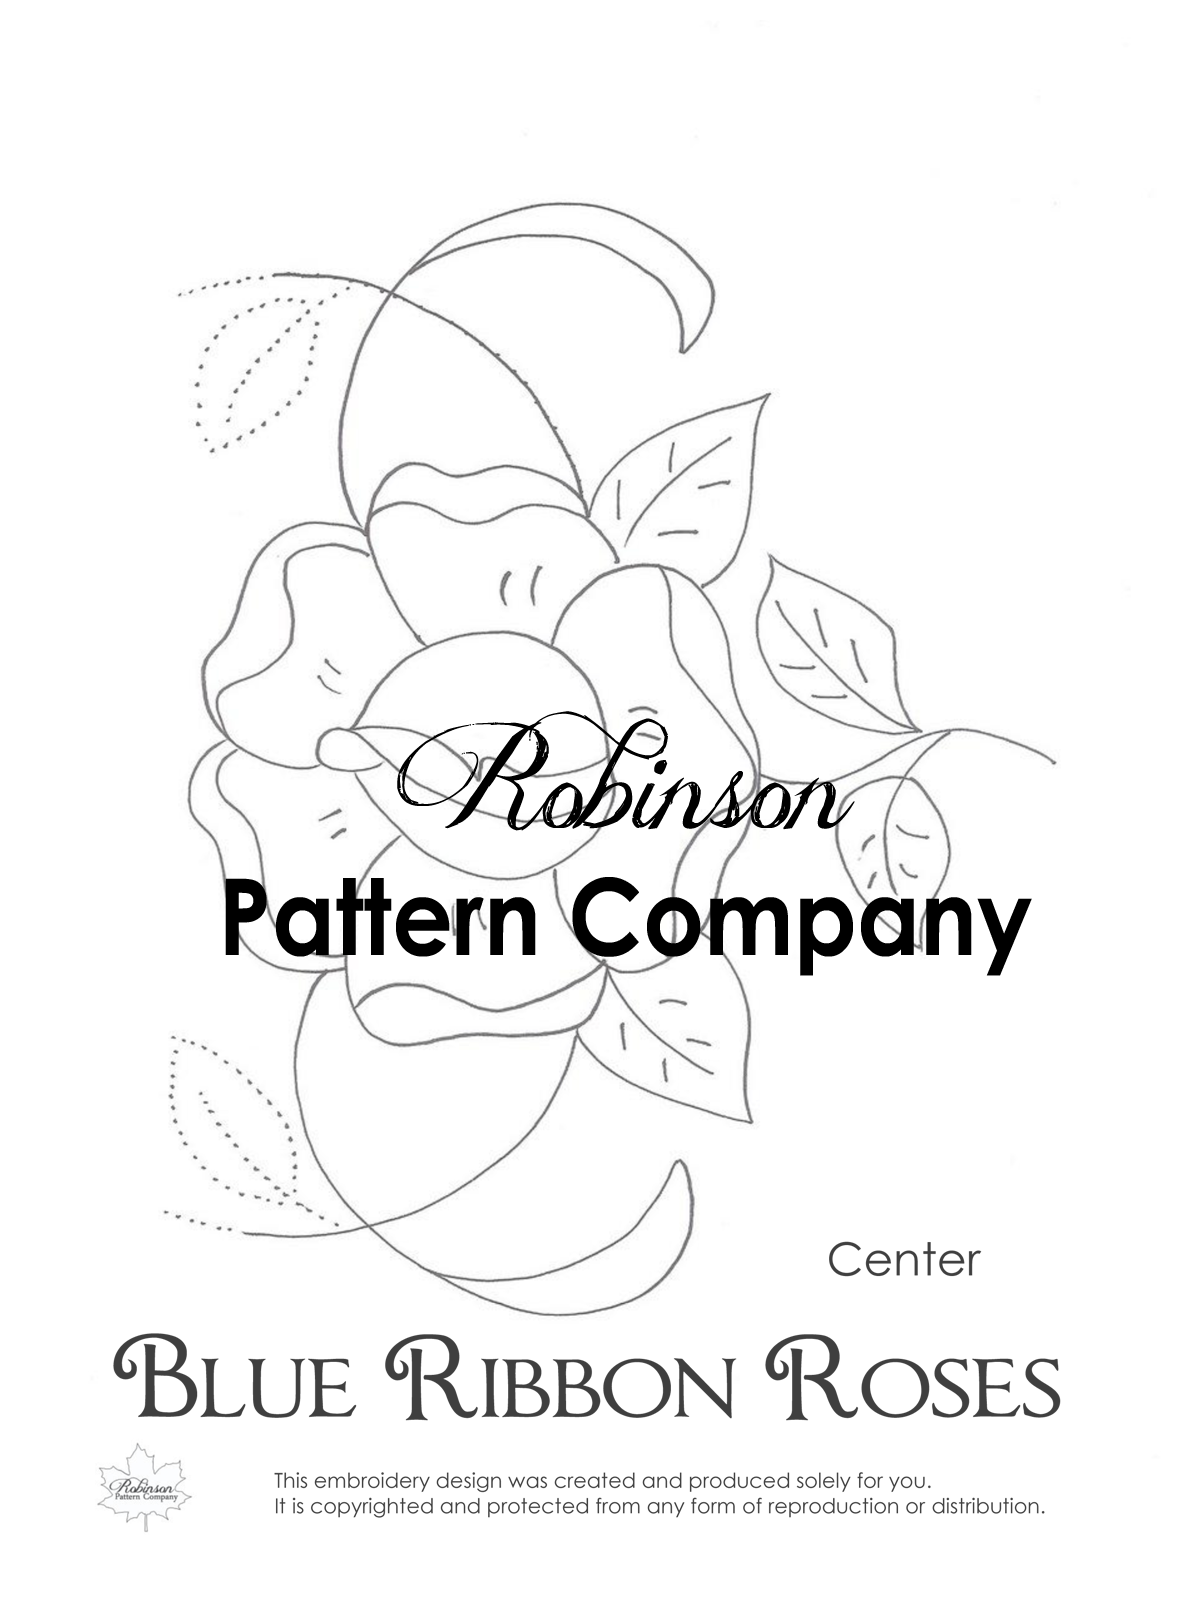 Blue Ribbon Roses Hand Embroidery pattern